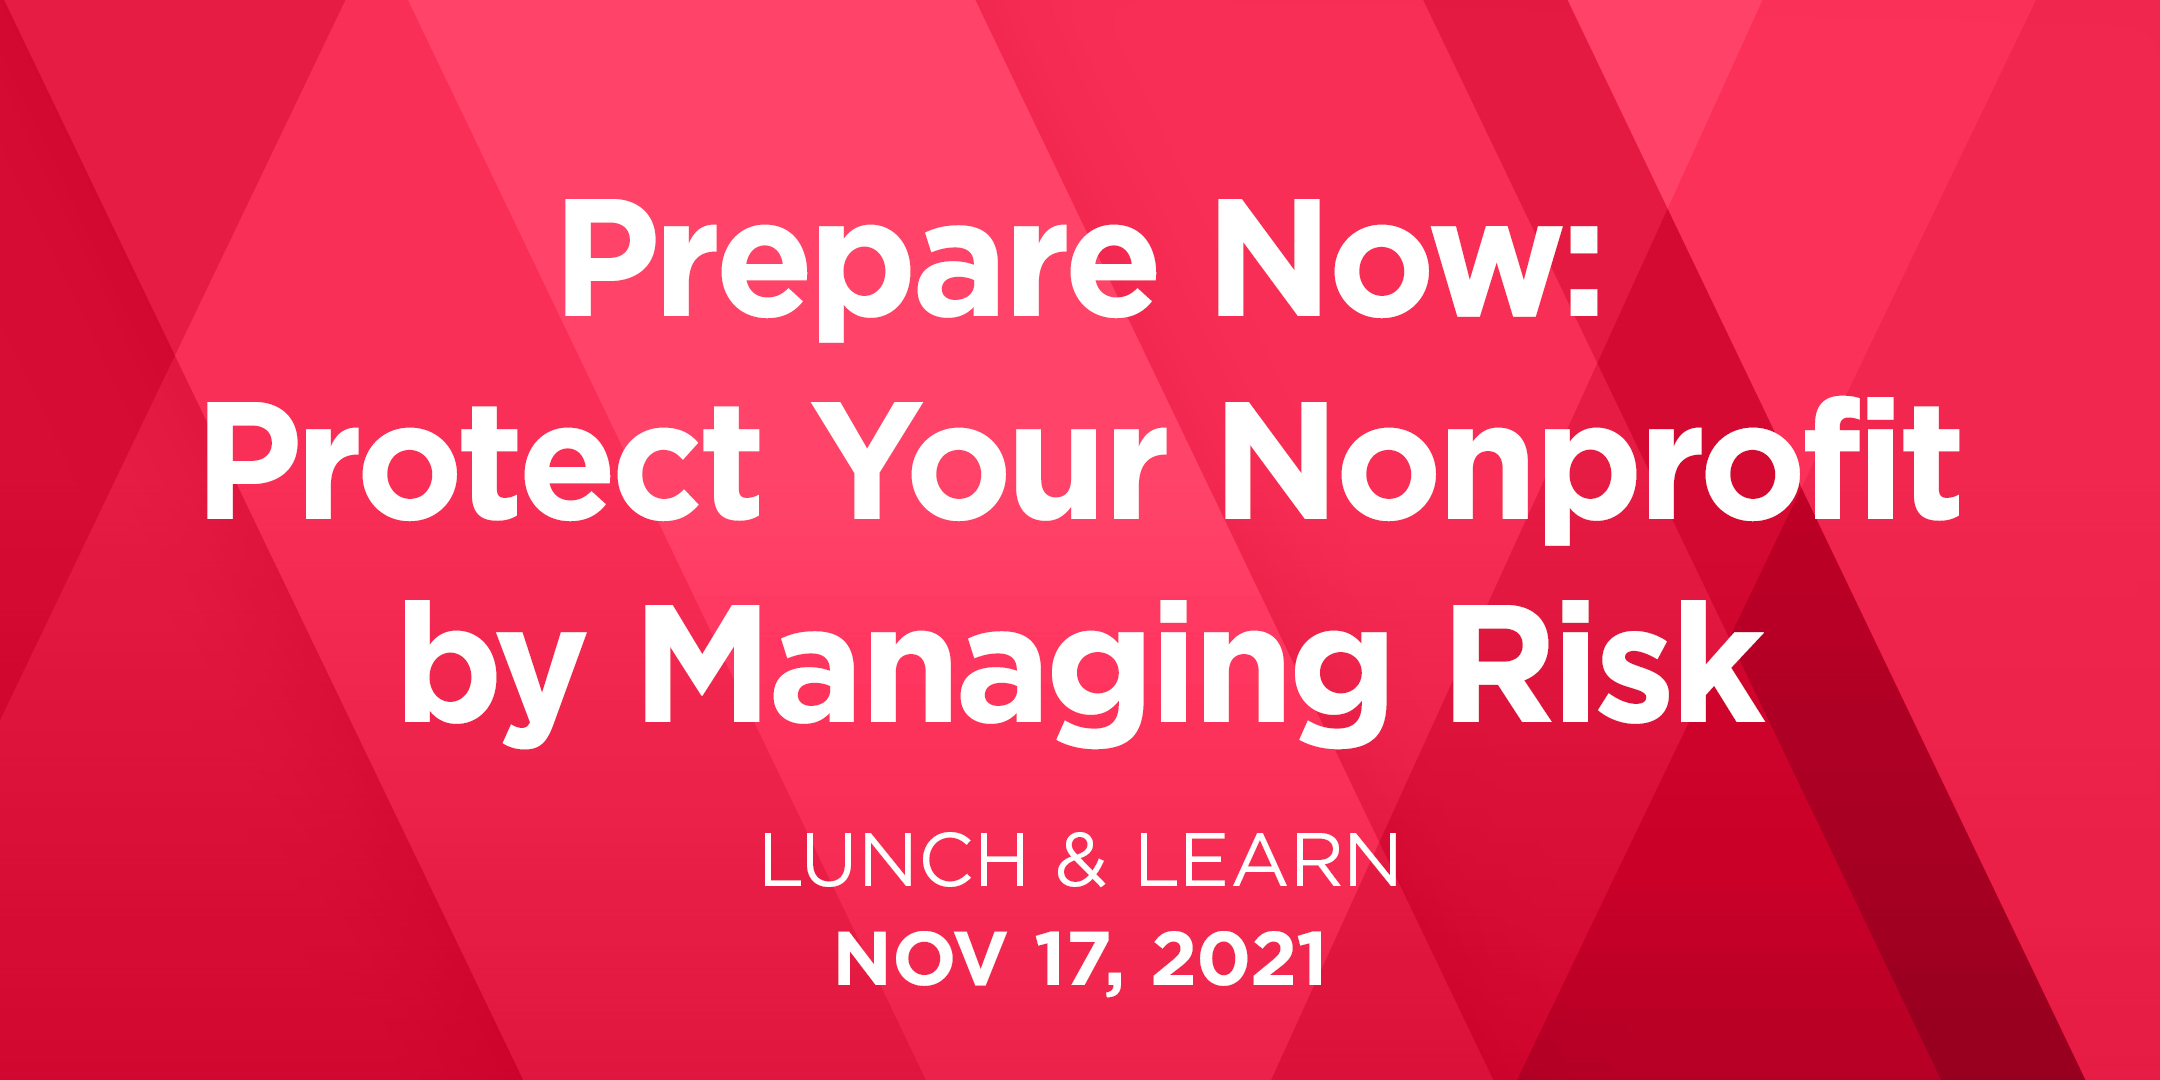 Lunch & Learn - Prepare Now: Protect Your Nonprofit by Managing Risk